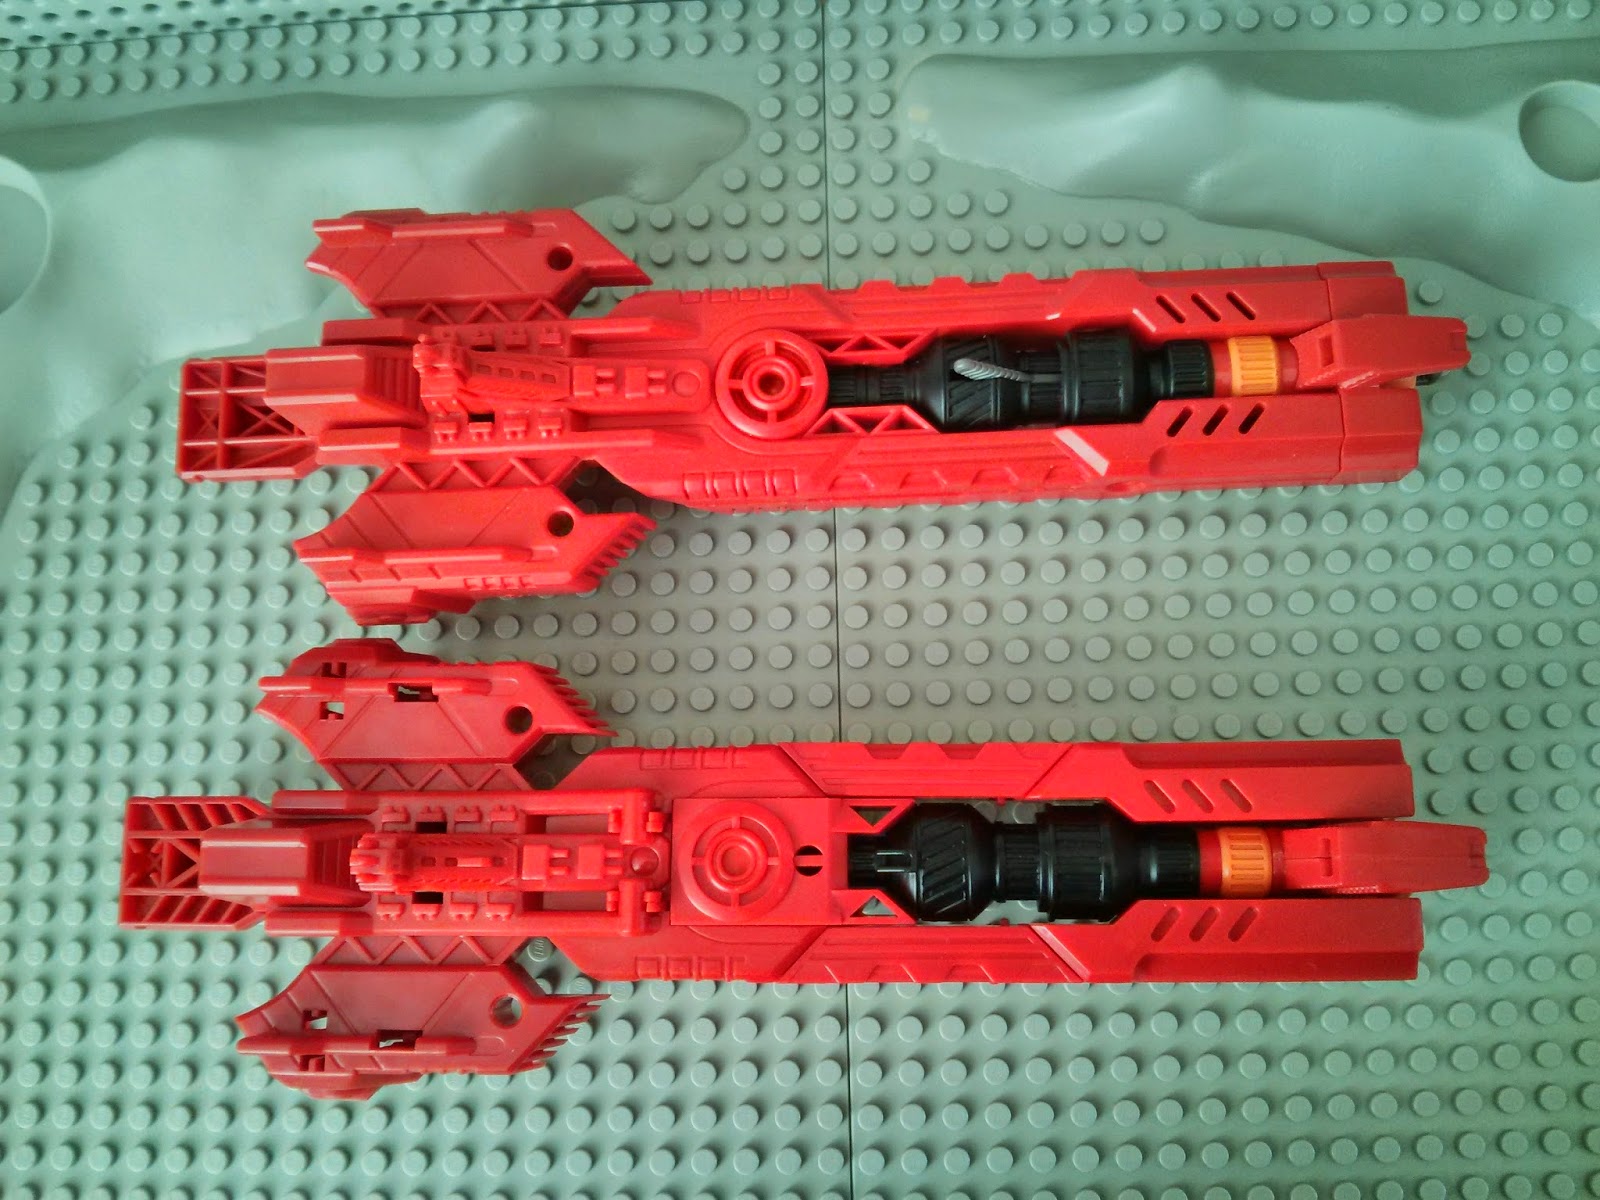 the x2 gun compared with the stock Metroplex rifle